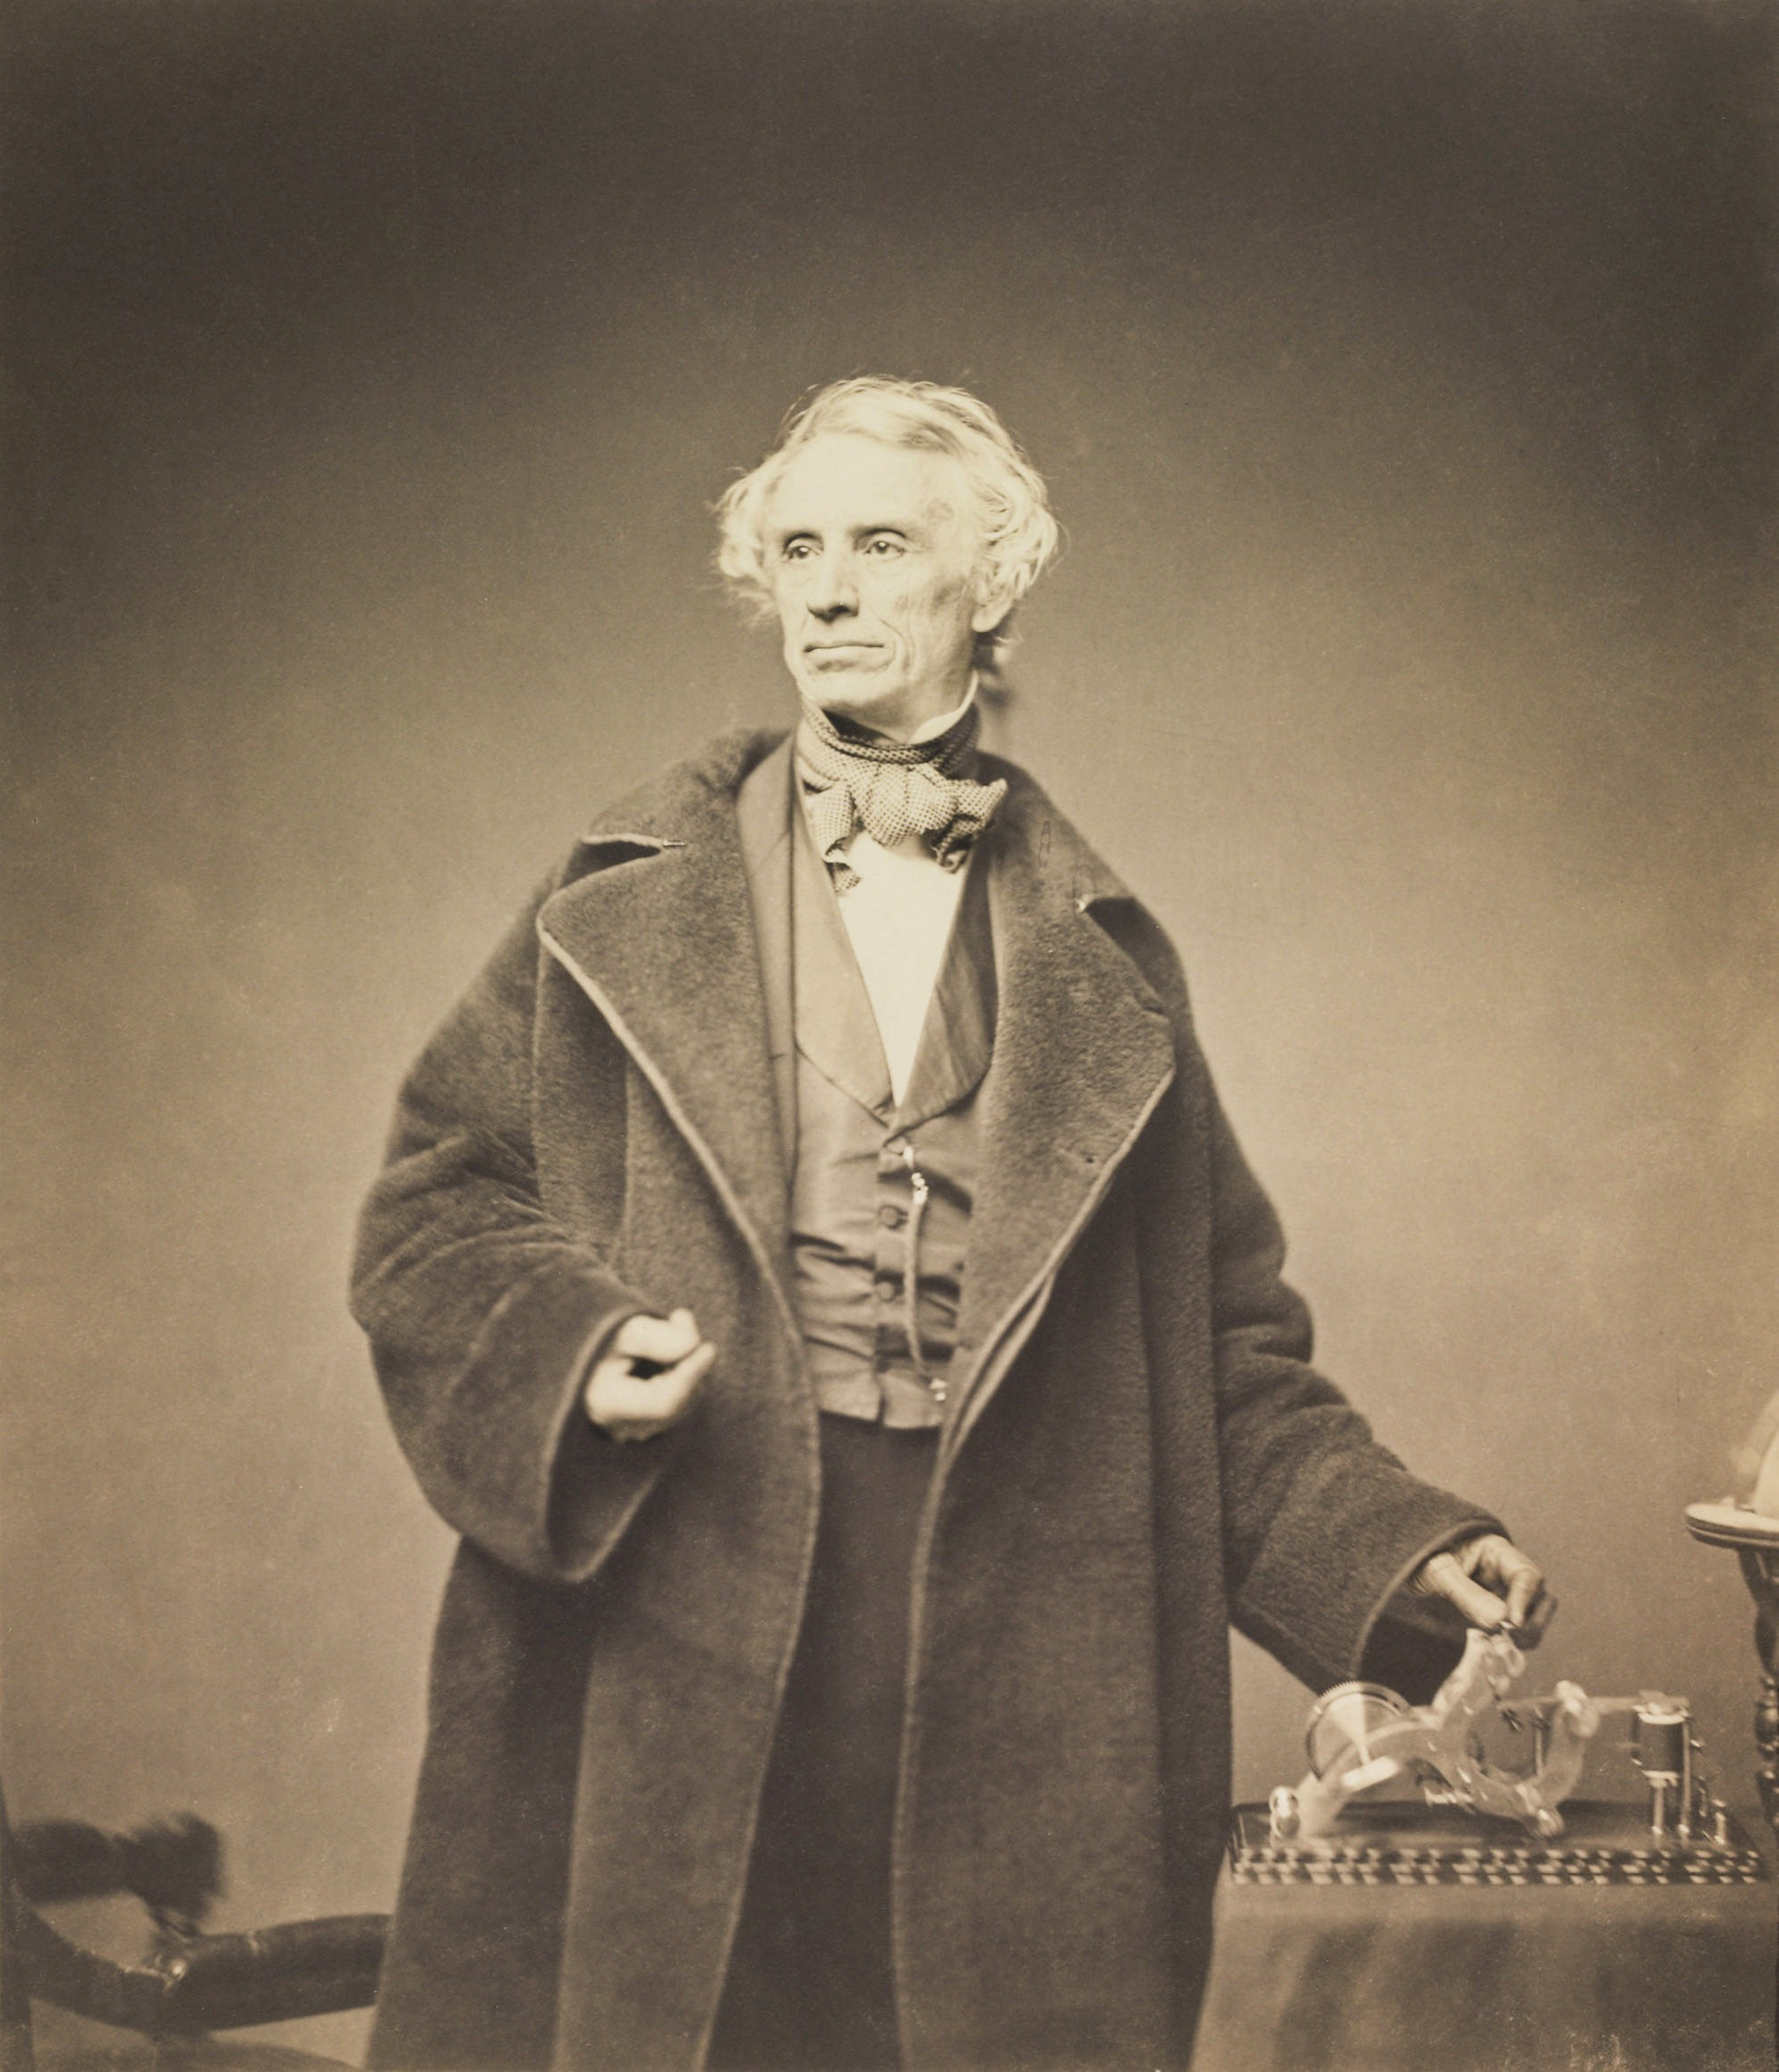 A portrait of Samuel Morse in a heavy coat with his telegraph.